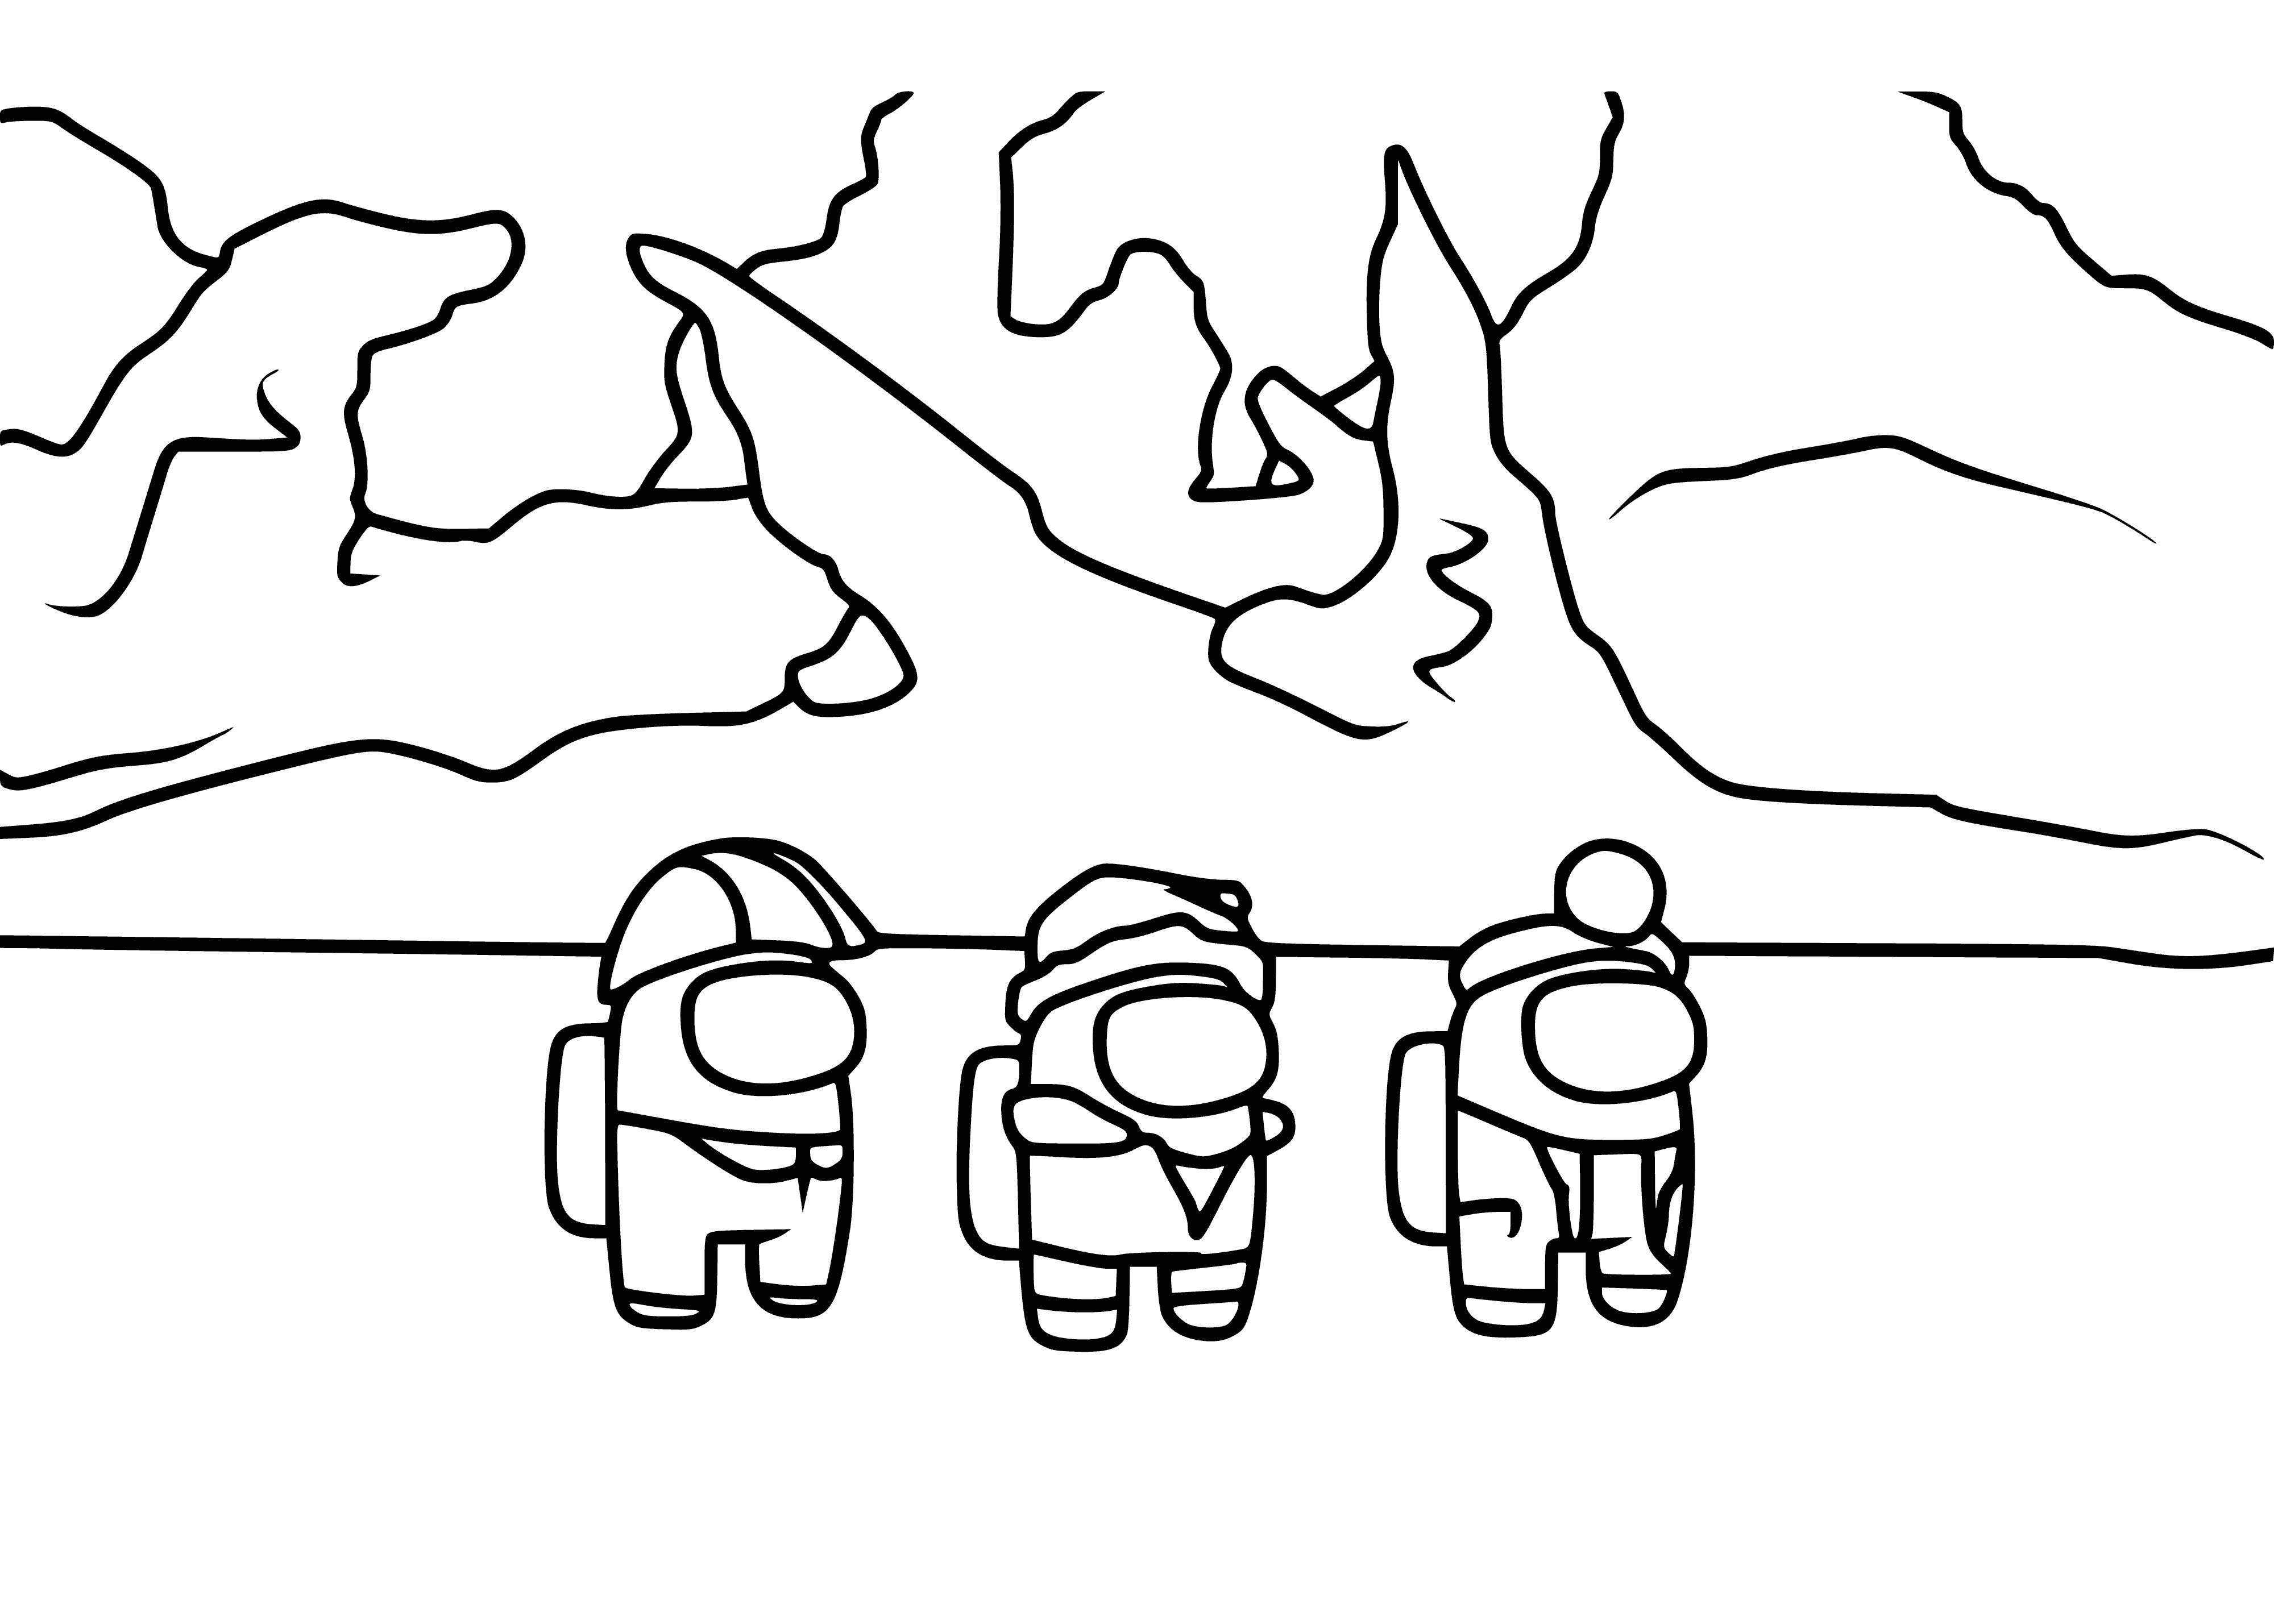 coloring page: 4 figures on dark surface; 2 have helmets, guns. 2 have dark clothing, 1 holding large object, 1 arms raised.